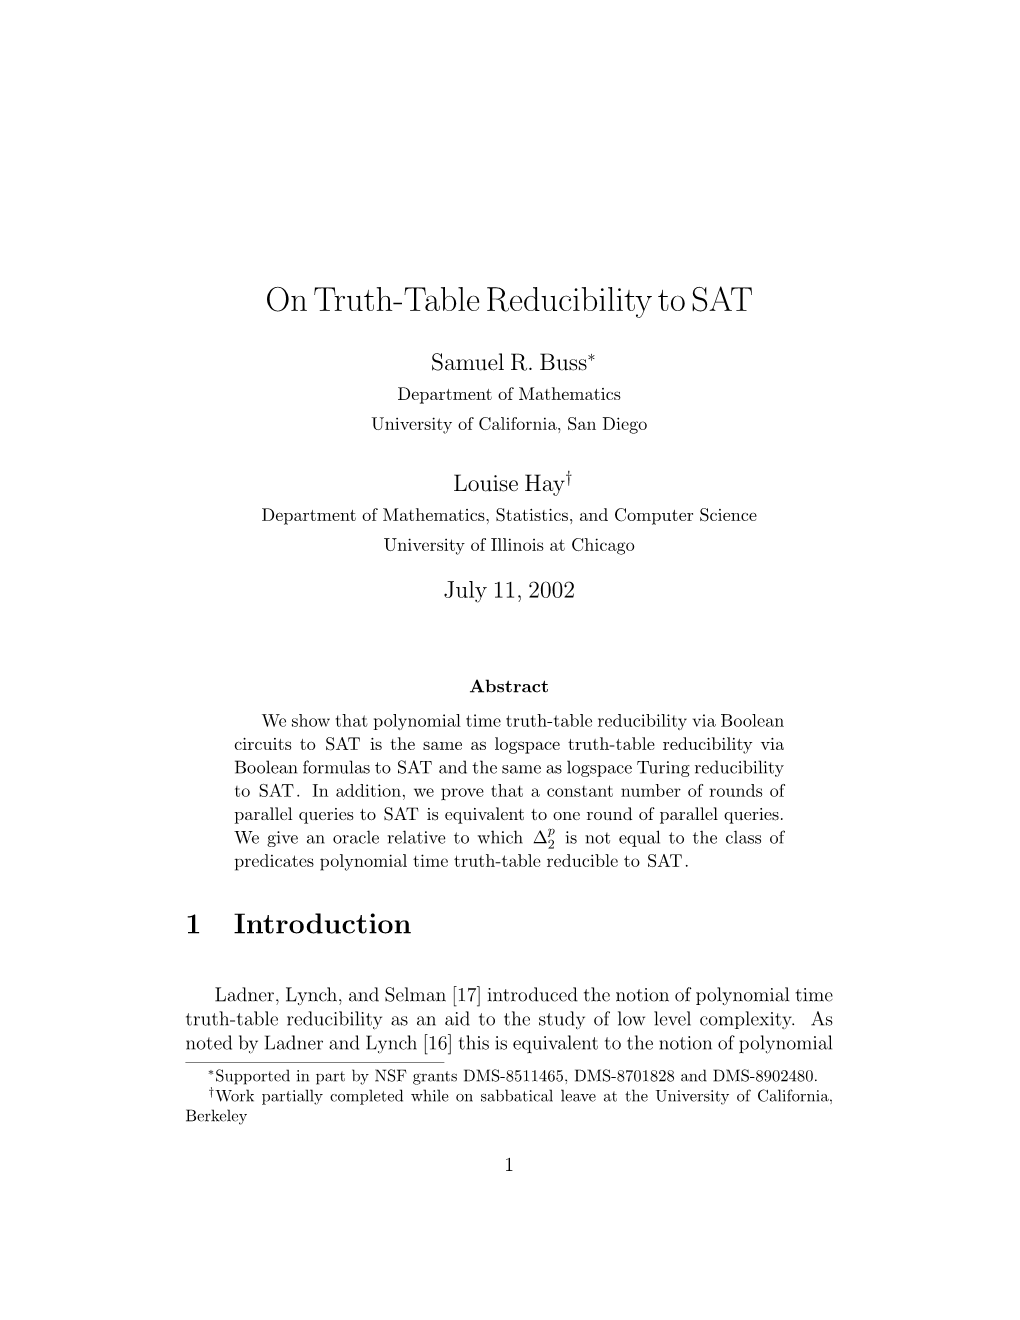 On Truth-Table Reducibility to SAT